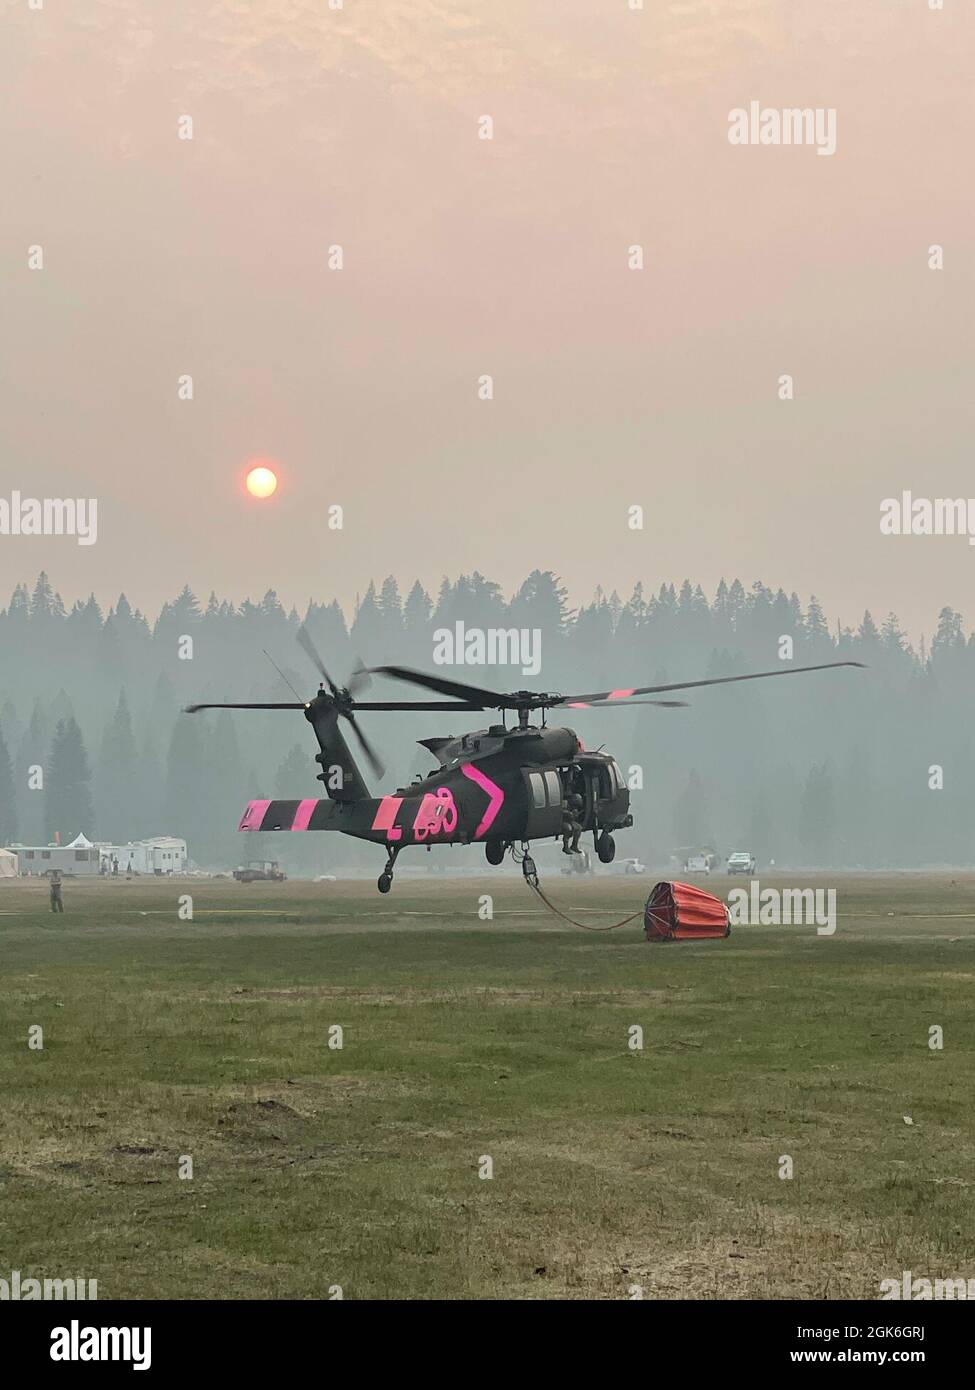 A U.S. Army UH-60 Black Hawk helicopter flown by the California Army National Guard lands at the Battle Creek helibase near Mineral, California, Aug. 17, 2021, while fighting the Dixie Fire. The fire eclipsed 600,000 acres and is currently the second-largest fire in California’s recorded history. Stock Photo